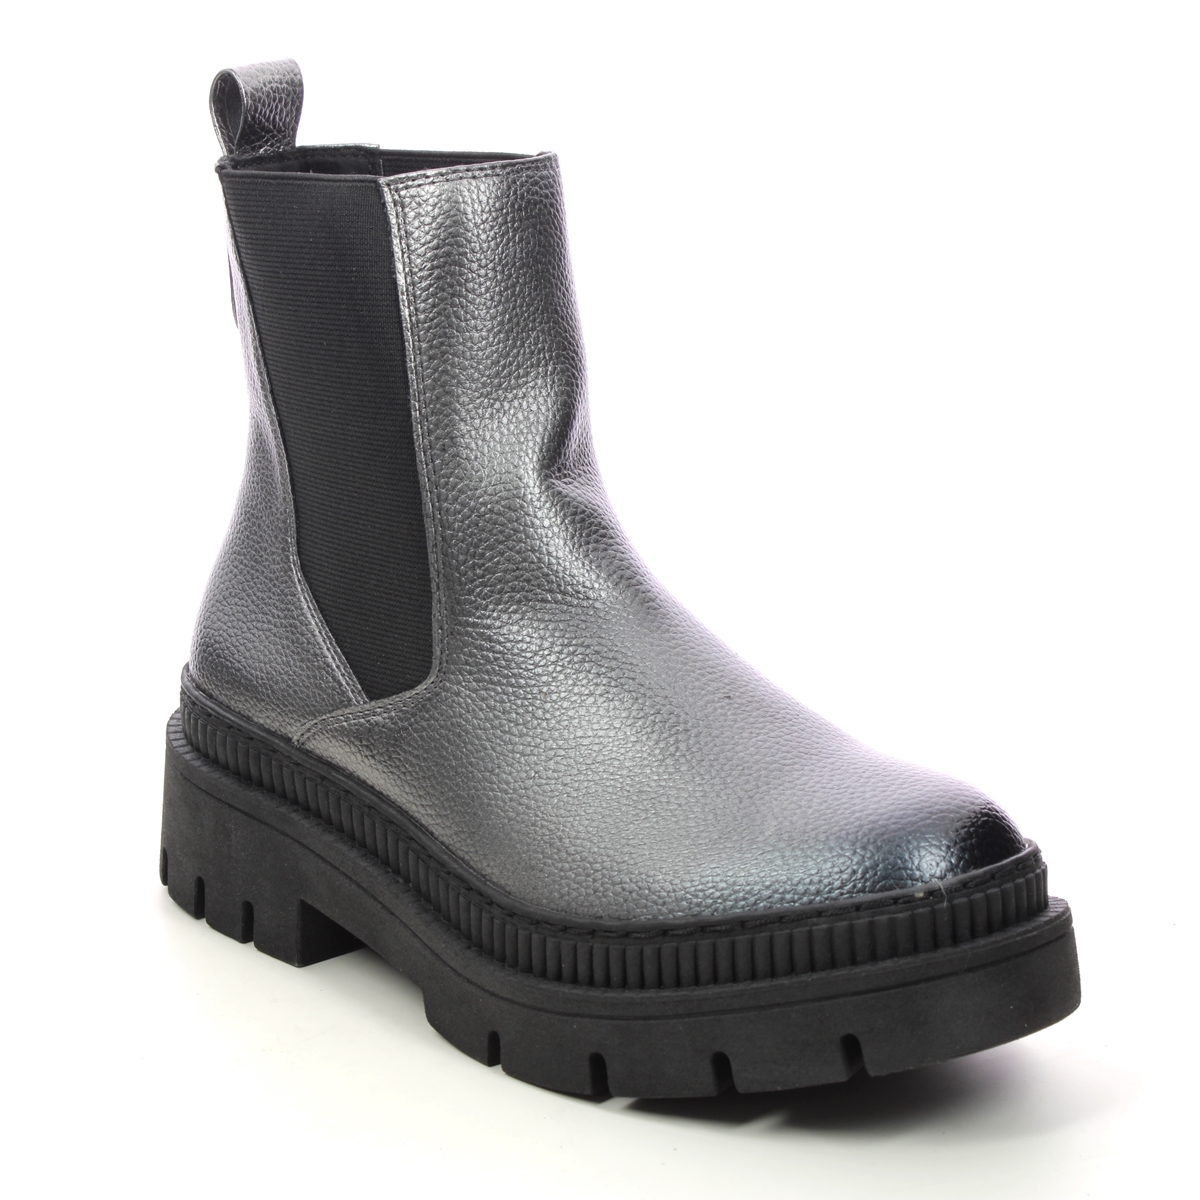 Marco Tozzi Rostra Chelsea Pewter Womens Chelsea Boots 25822-41-915 In Size 41 In Plain Pewter